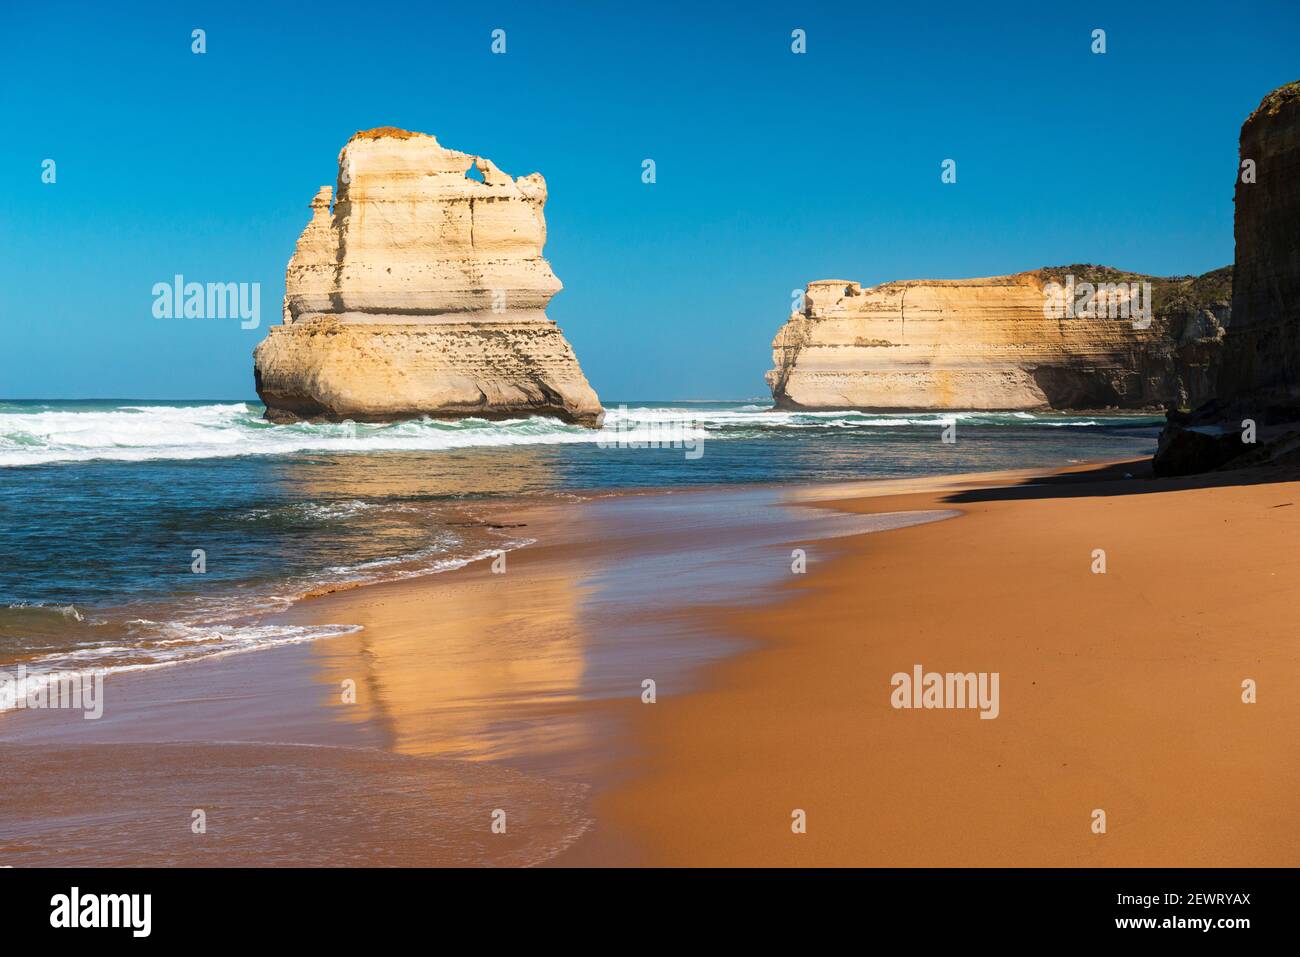 One of the Twelve Apostles and Southern Ocean, Twelve Apostles National Park, Port Campbell, Victoria, Australia, Pacific Stock Photo